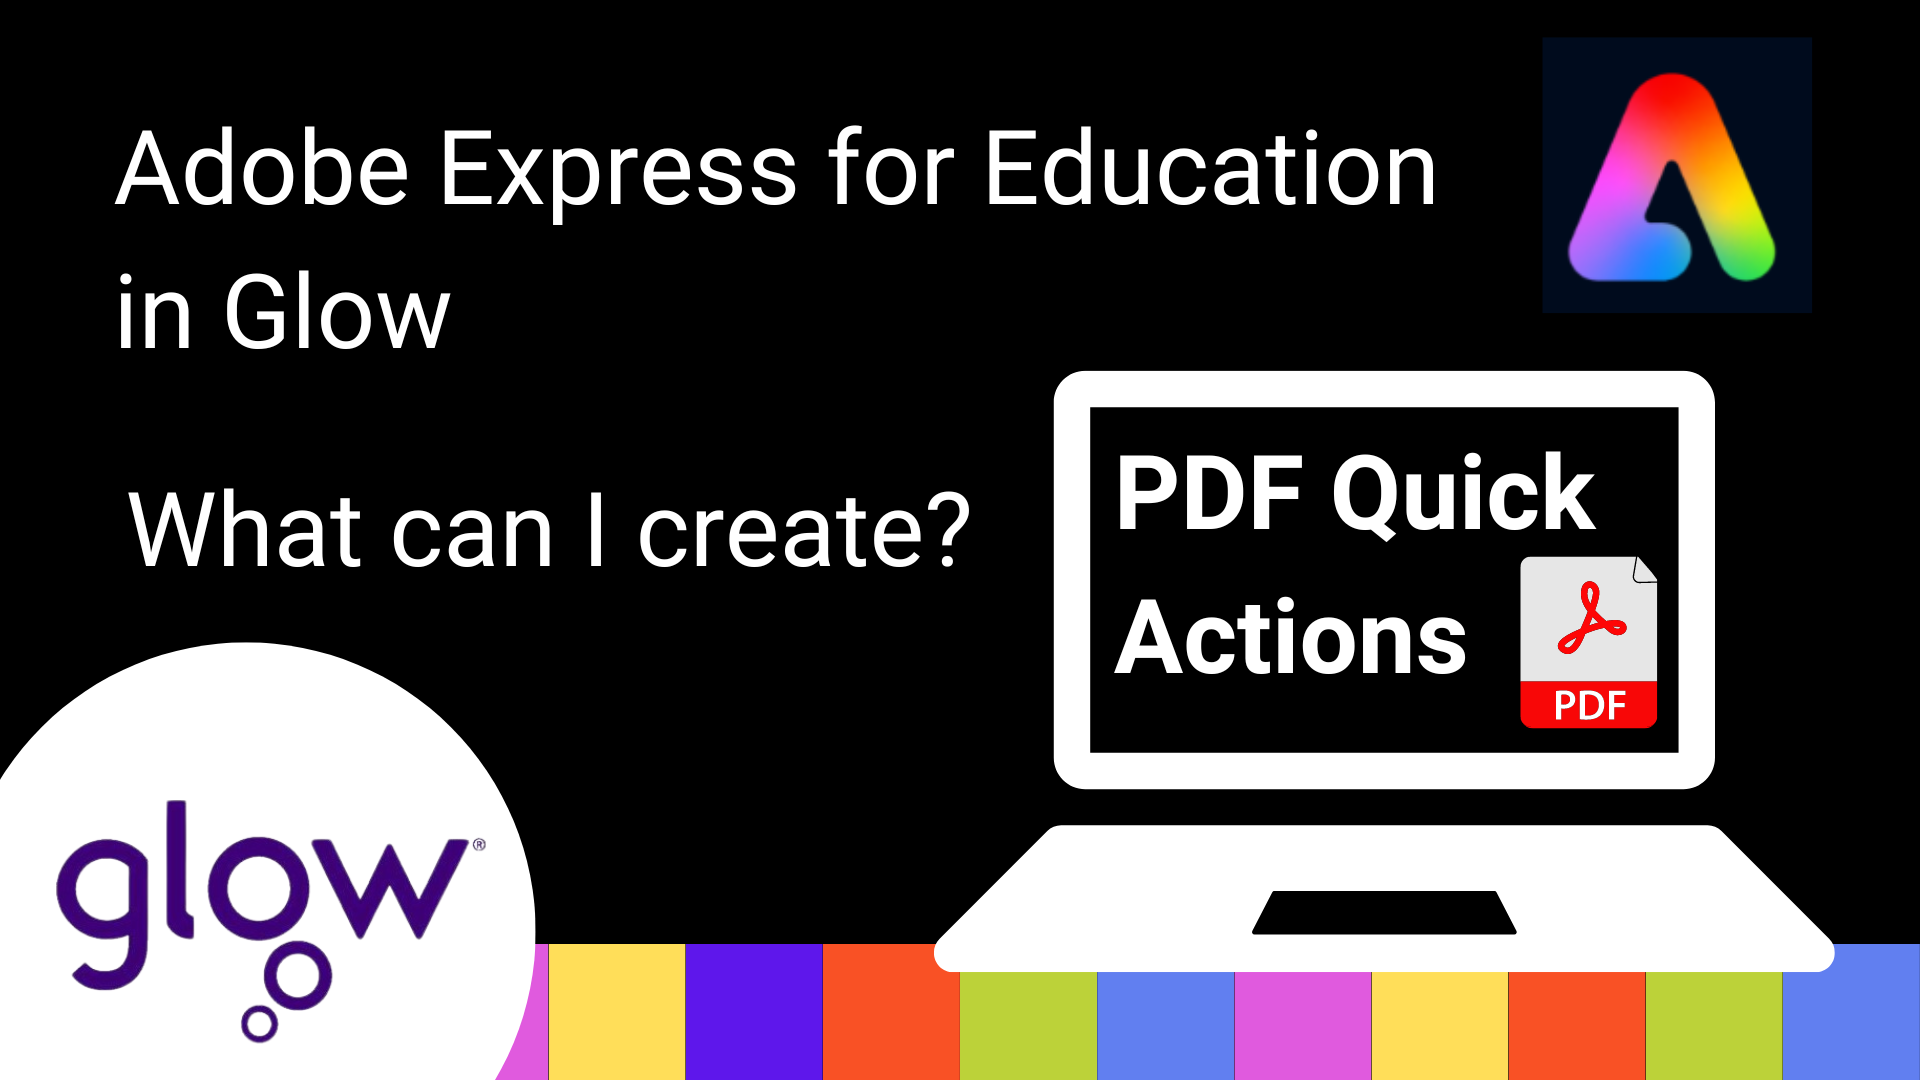 Adobe Express for Education in glow graphic. What can I create? PDF Quick Actions